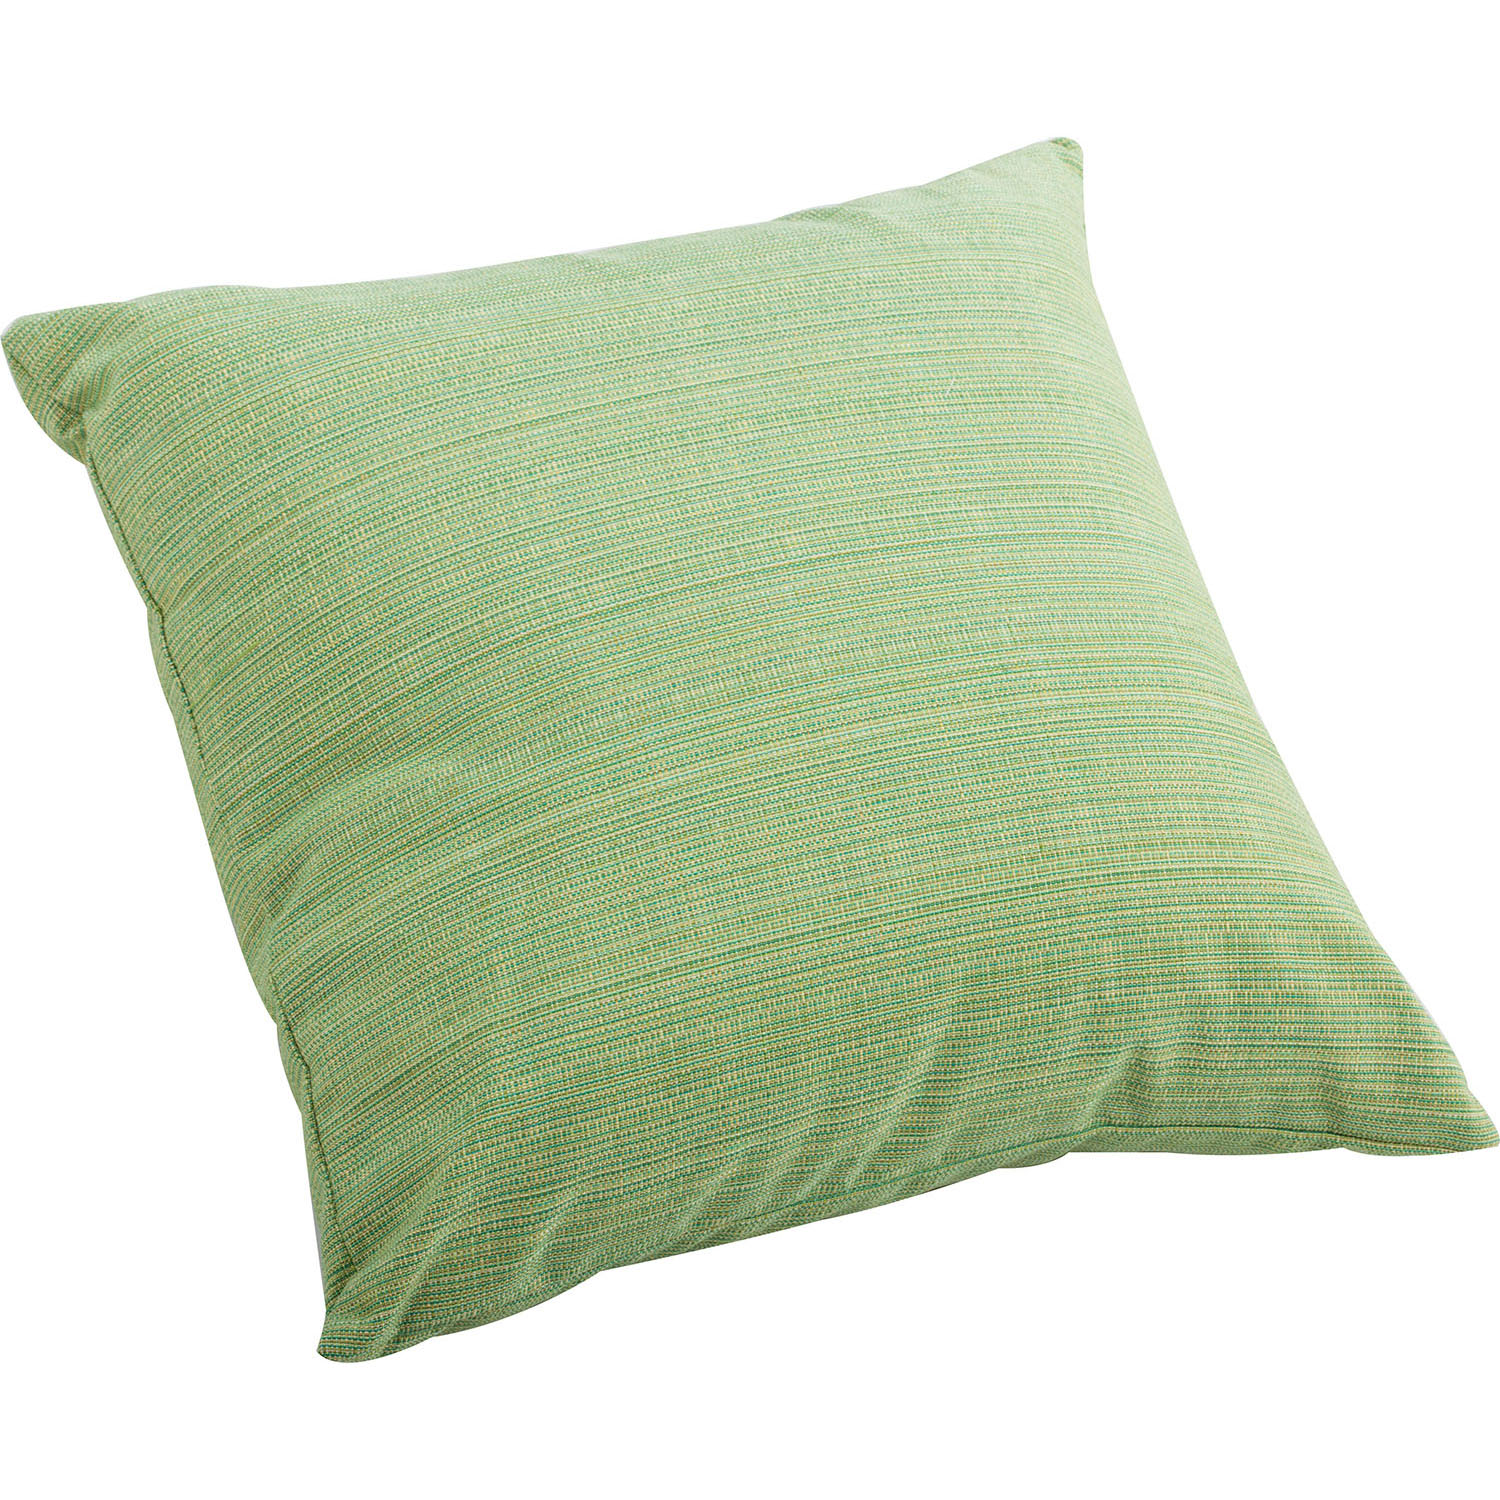 Outdoor Parrot Pillow Lime Mix Thread Pattern: Size Options